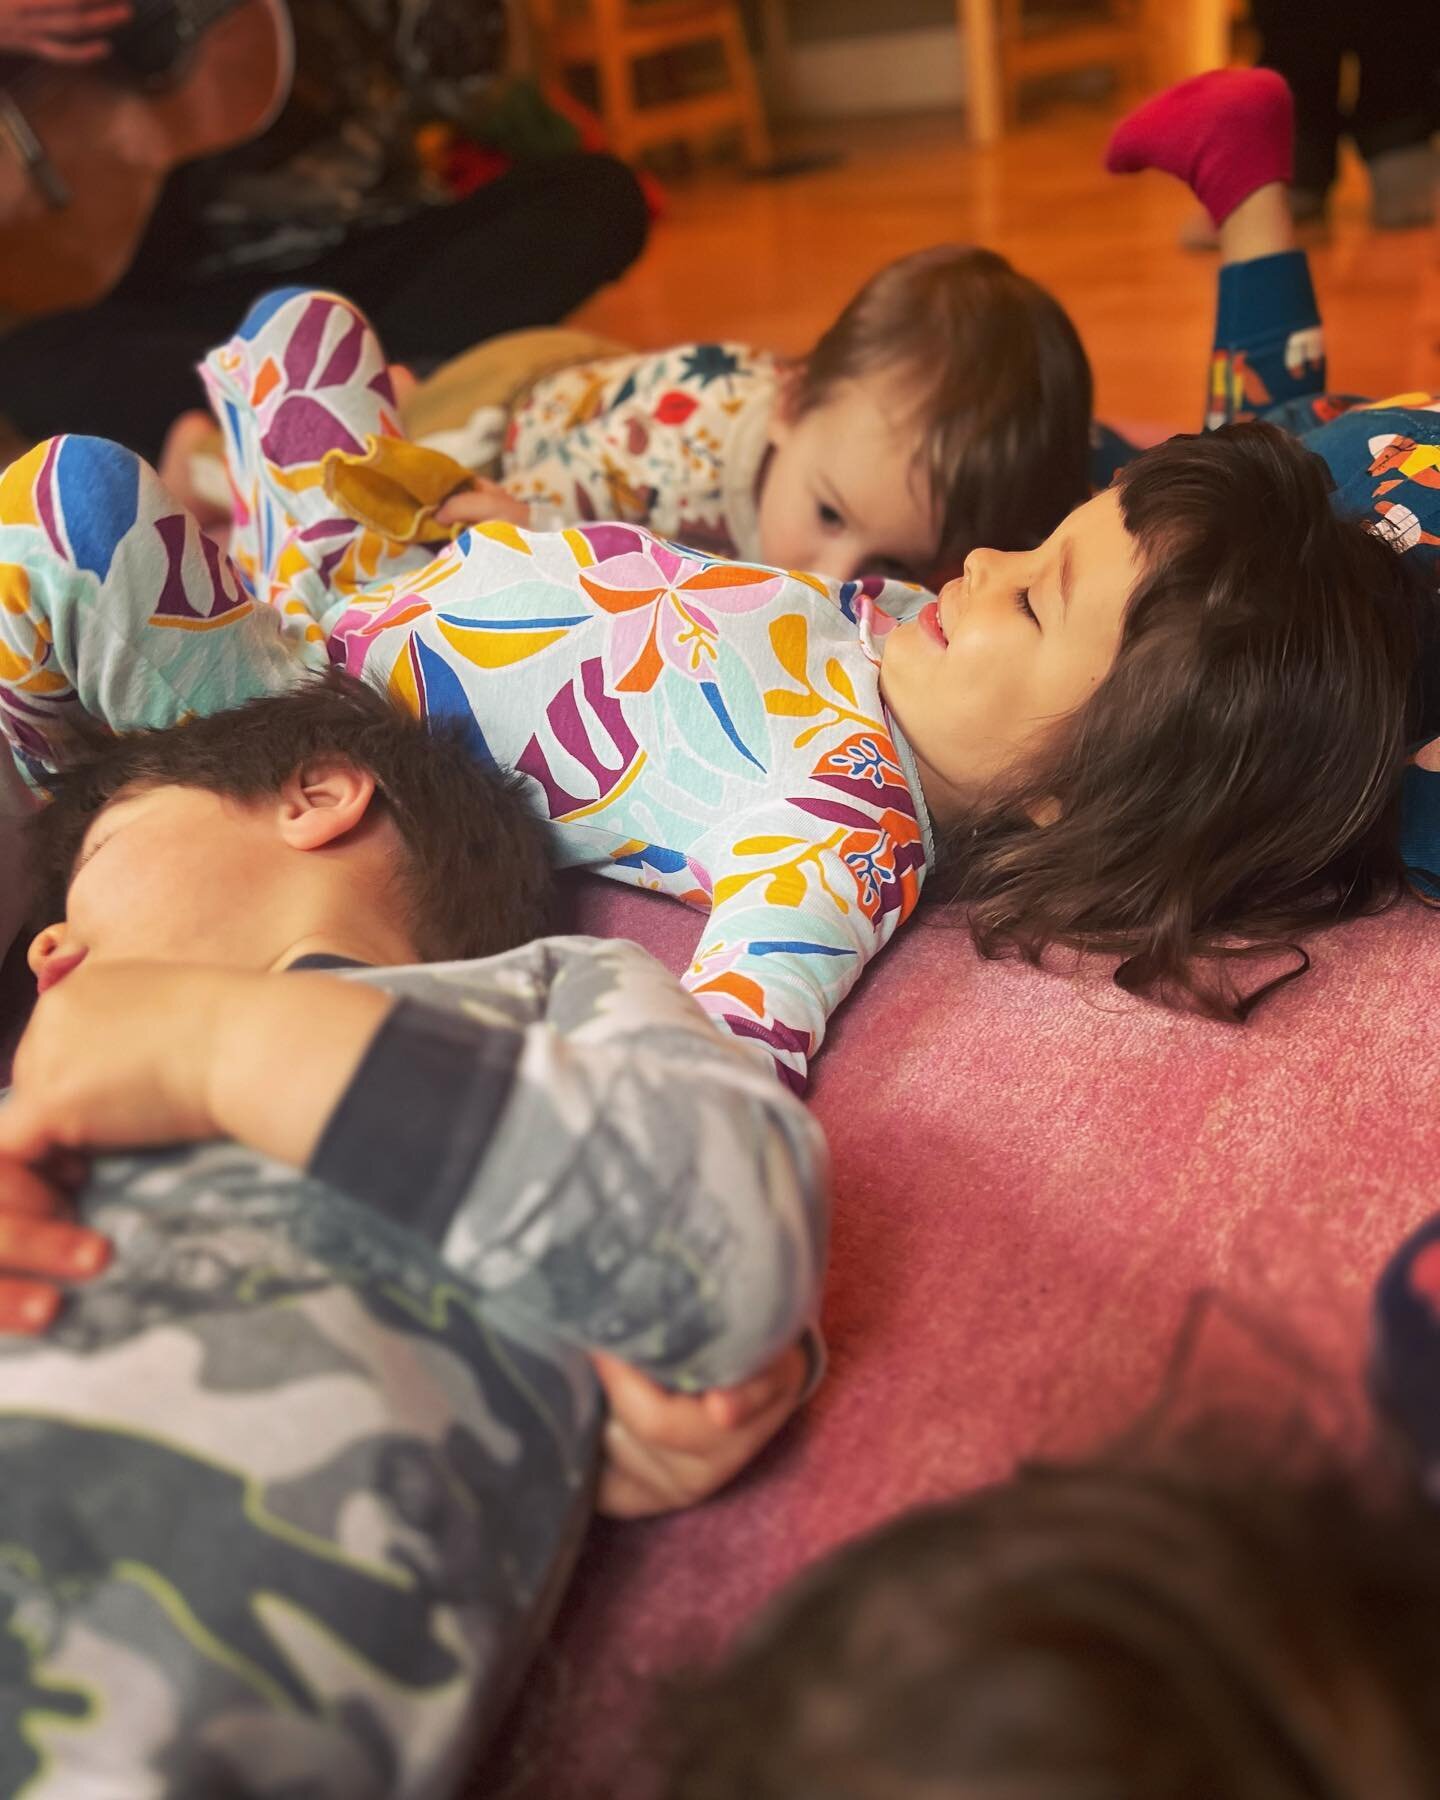 Pajama day and music circle with @heidiunderhere on the same day! One of our most favorite things right now is playing with and learning about babies! What do babies do? What do they need help with? What do babies need? What to babies like? How can w